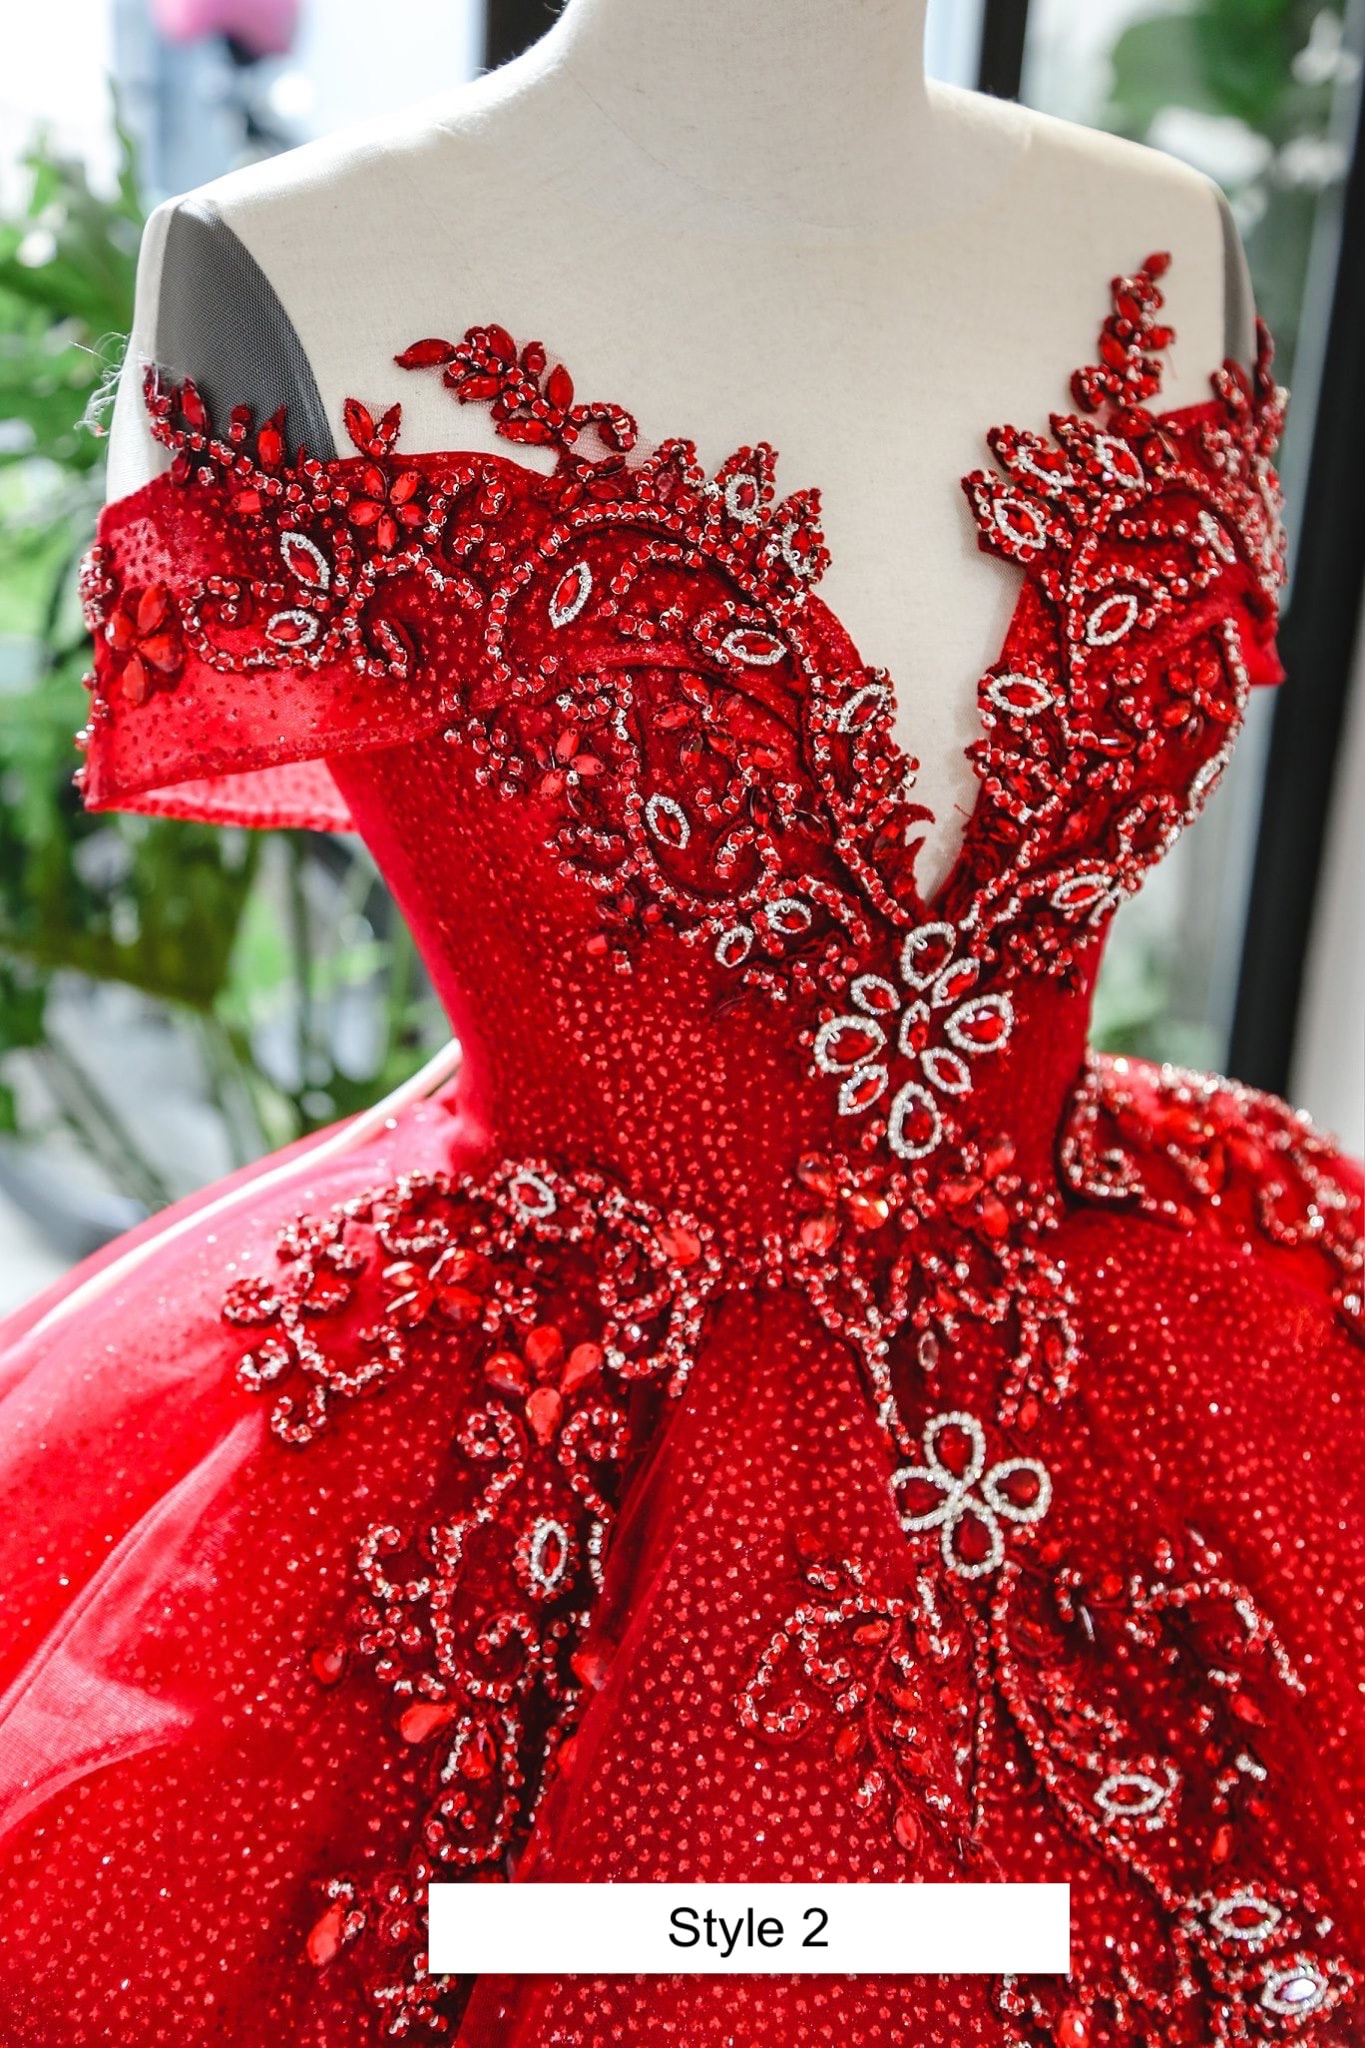 Lady in red - Queen style sleeves red sparkle ball gown wedding dress ...